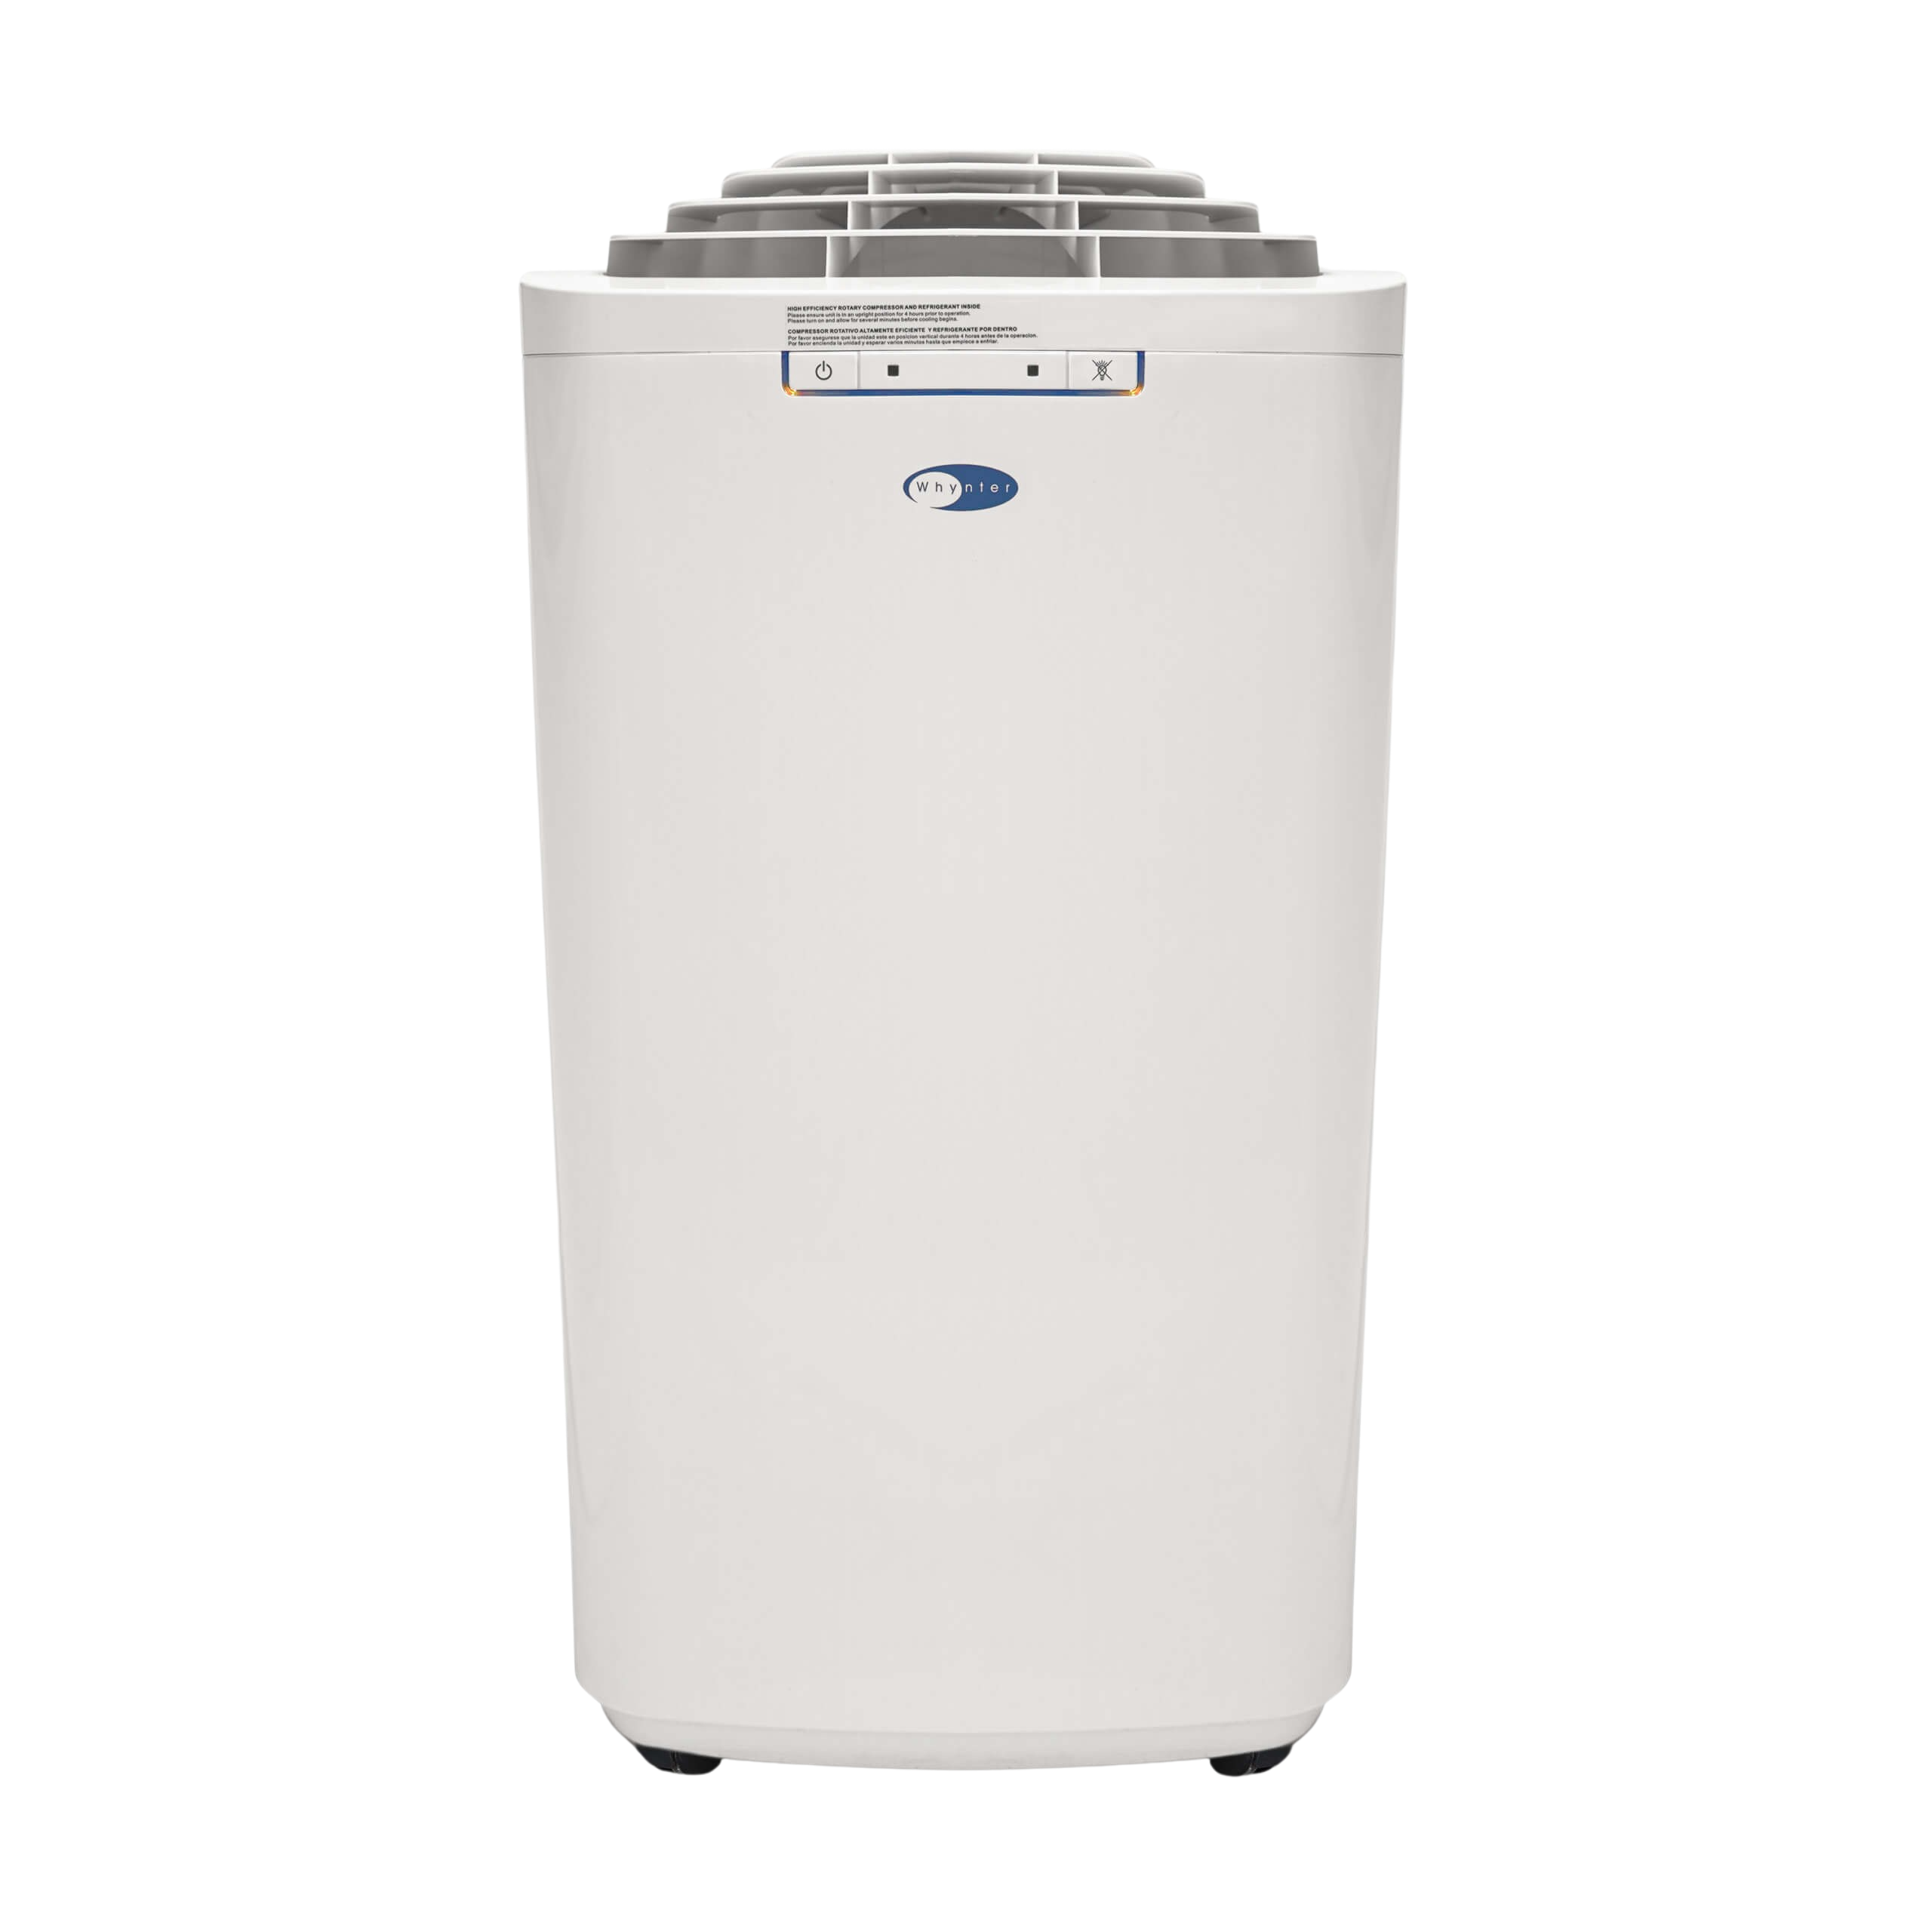 Whynter, Whynter ARC-110WD 11,000 BTU Dual Hose Portable Air Conditioner with Dehumidifier New